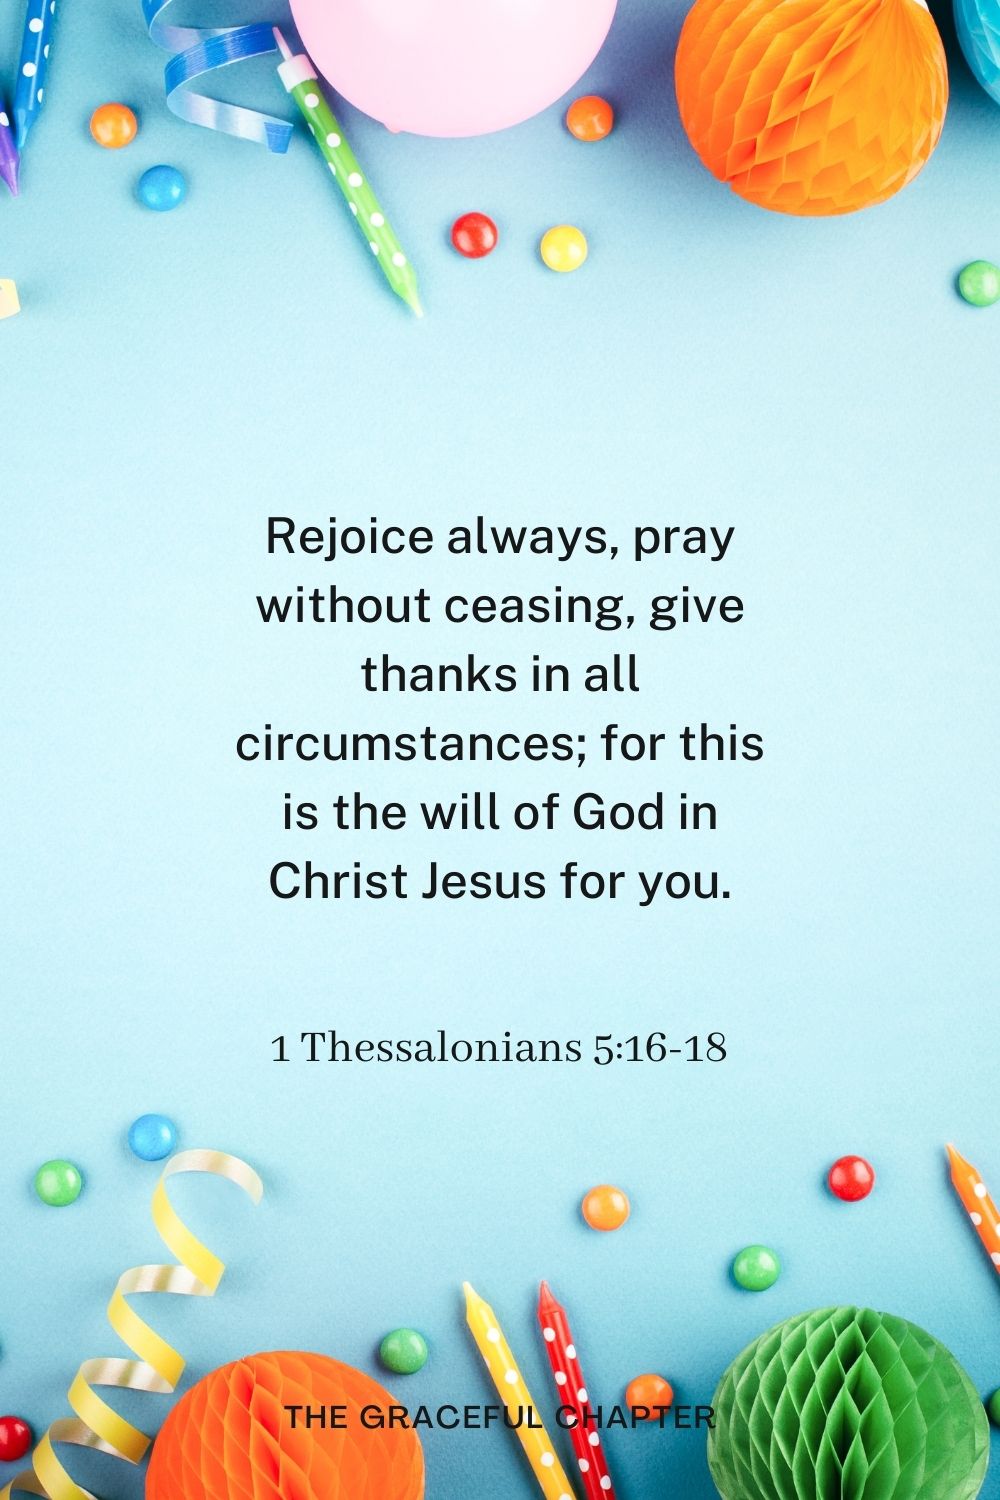 Rejoice always, pray without ceasing, give thanks in all circumstances; for this is the will of God in Christ Jesus for you. Rejoice always, pray without ceasing, give thanks in all circumstances; for this is the will of God in Christ Jesus for you. 1 Thessalonians 5:16-18